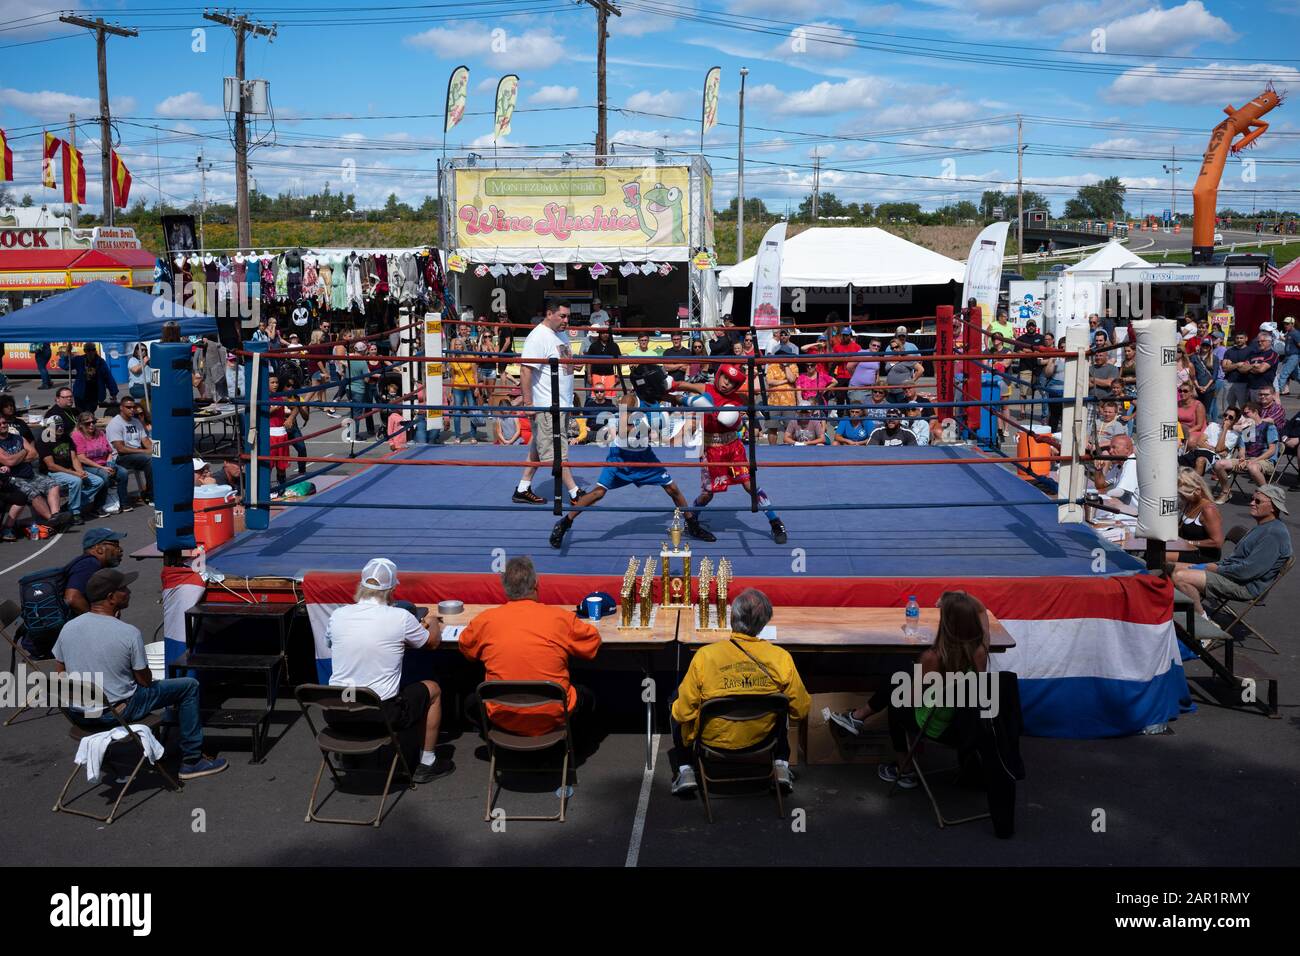 Sryacuse, NY/USA - Aug 31, 2019: Two boys fight each other during an amature boxing match held at The Great New York State Fair. Stock Photo